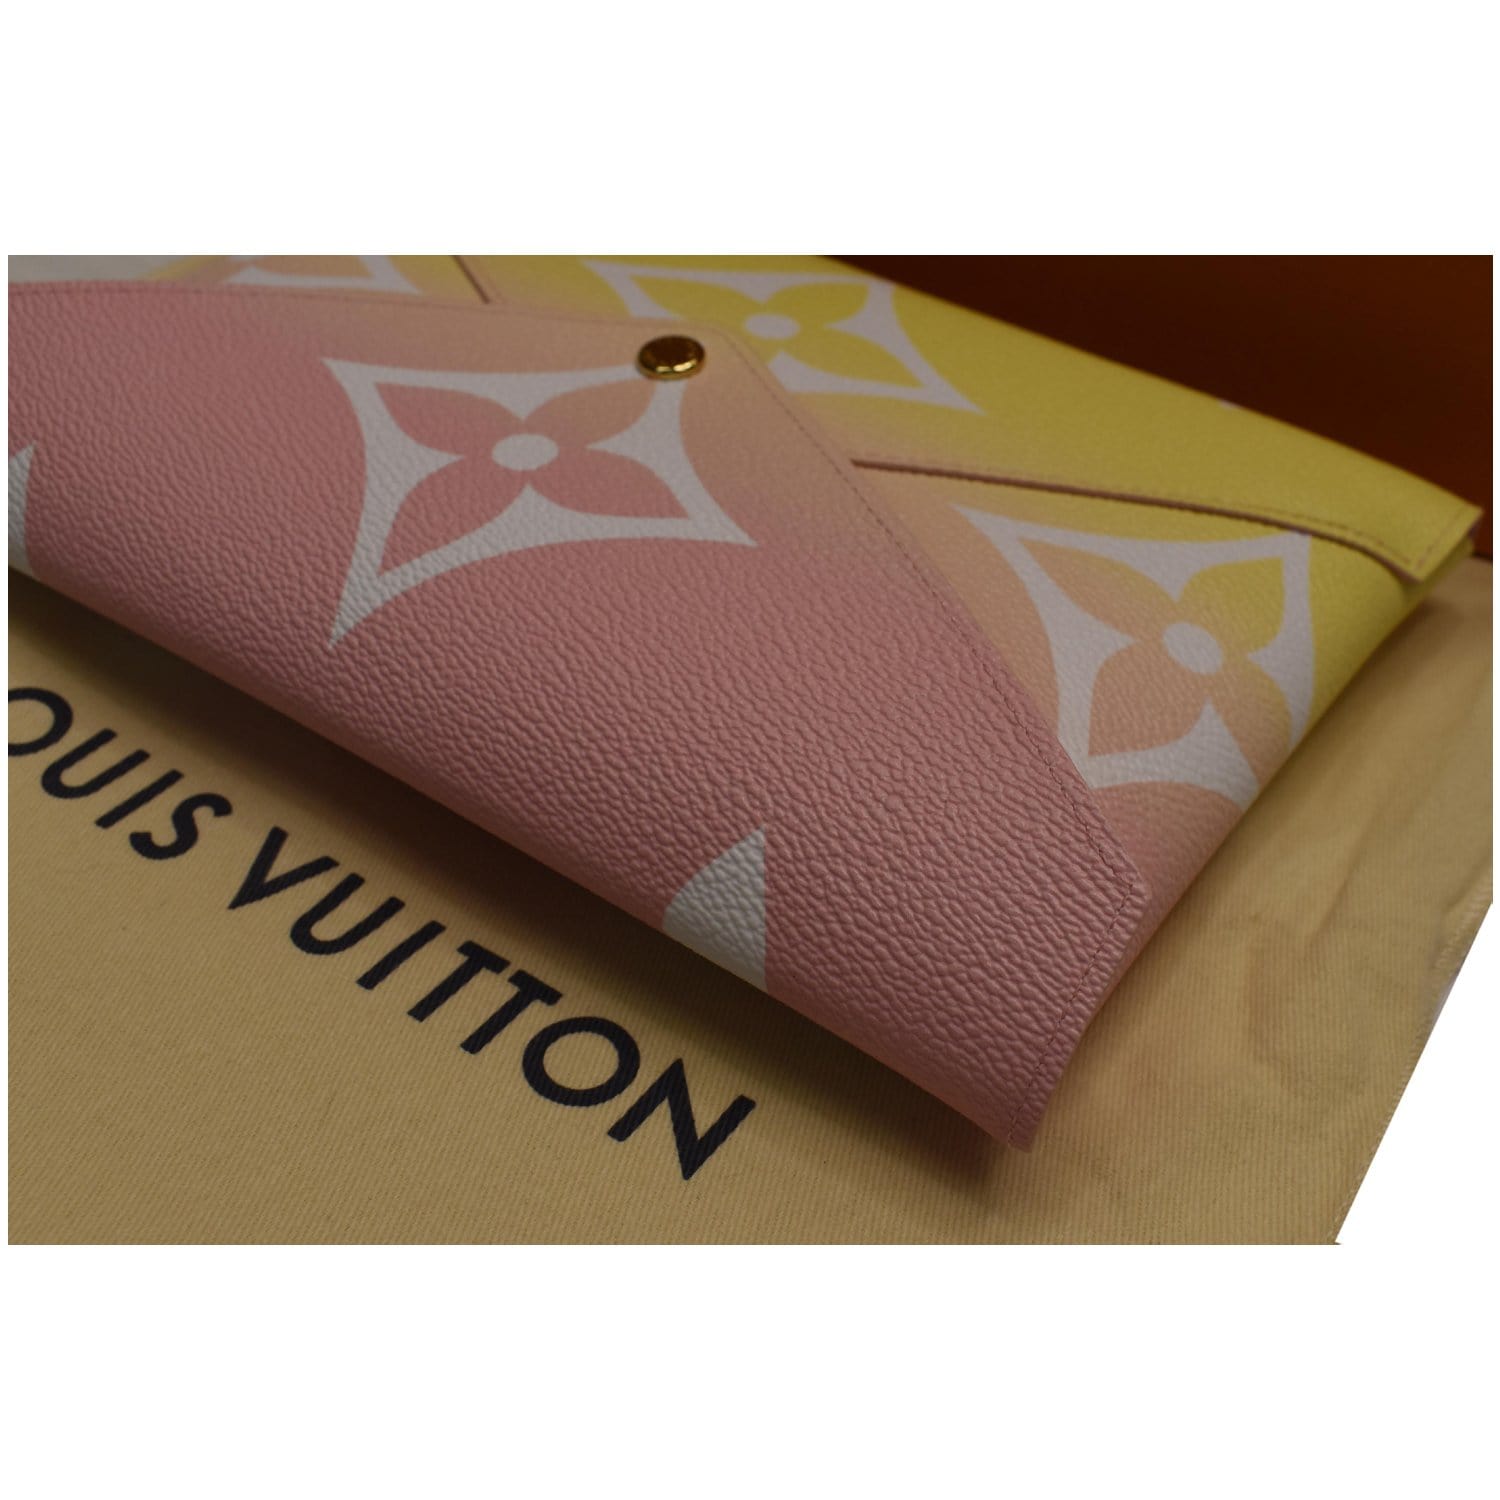 Louis Vuitton LV by The Pool Kirigami Pochette, Multi, One Size